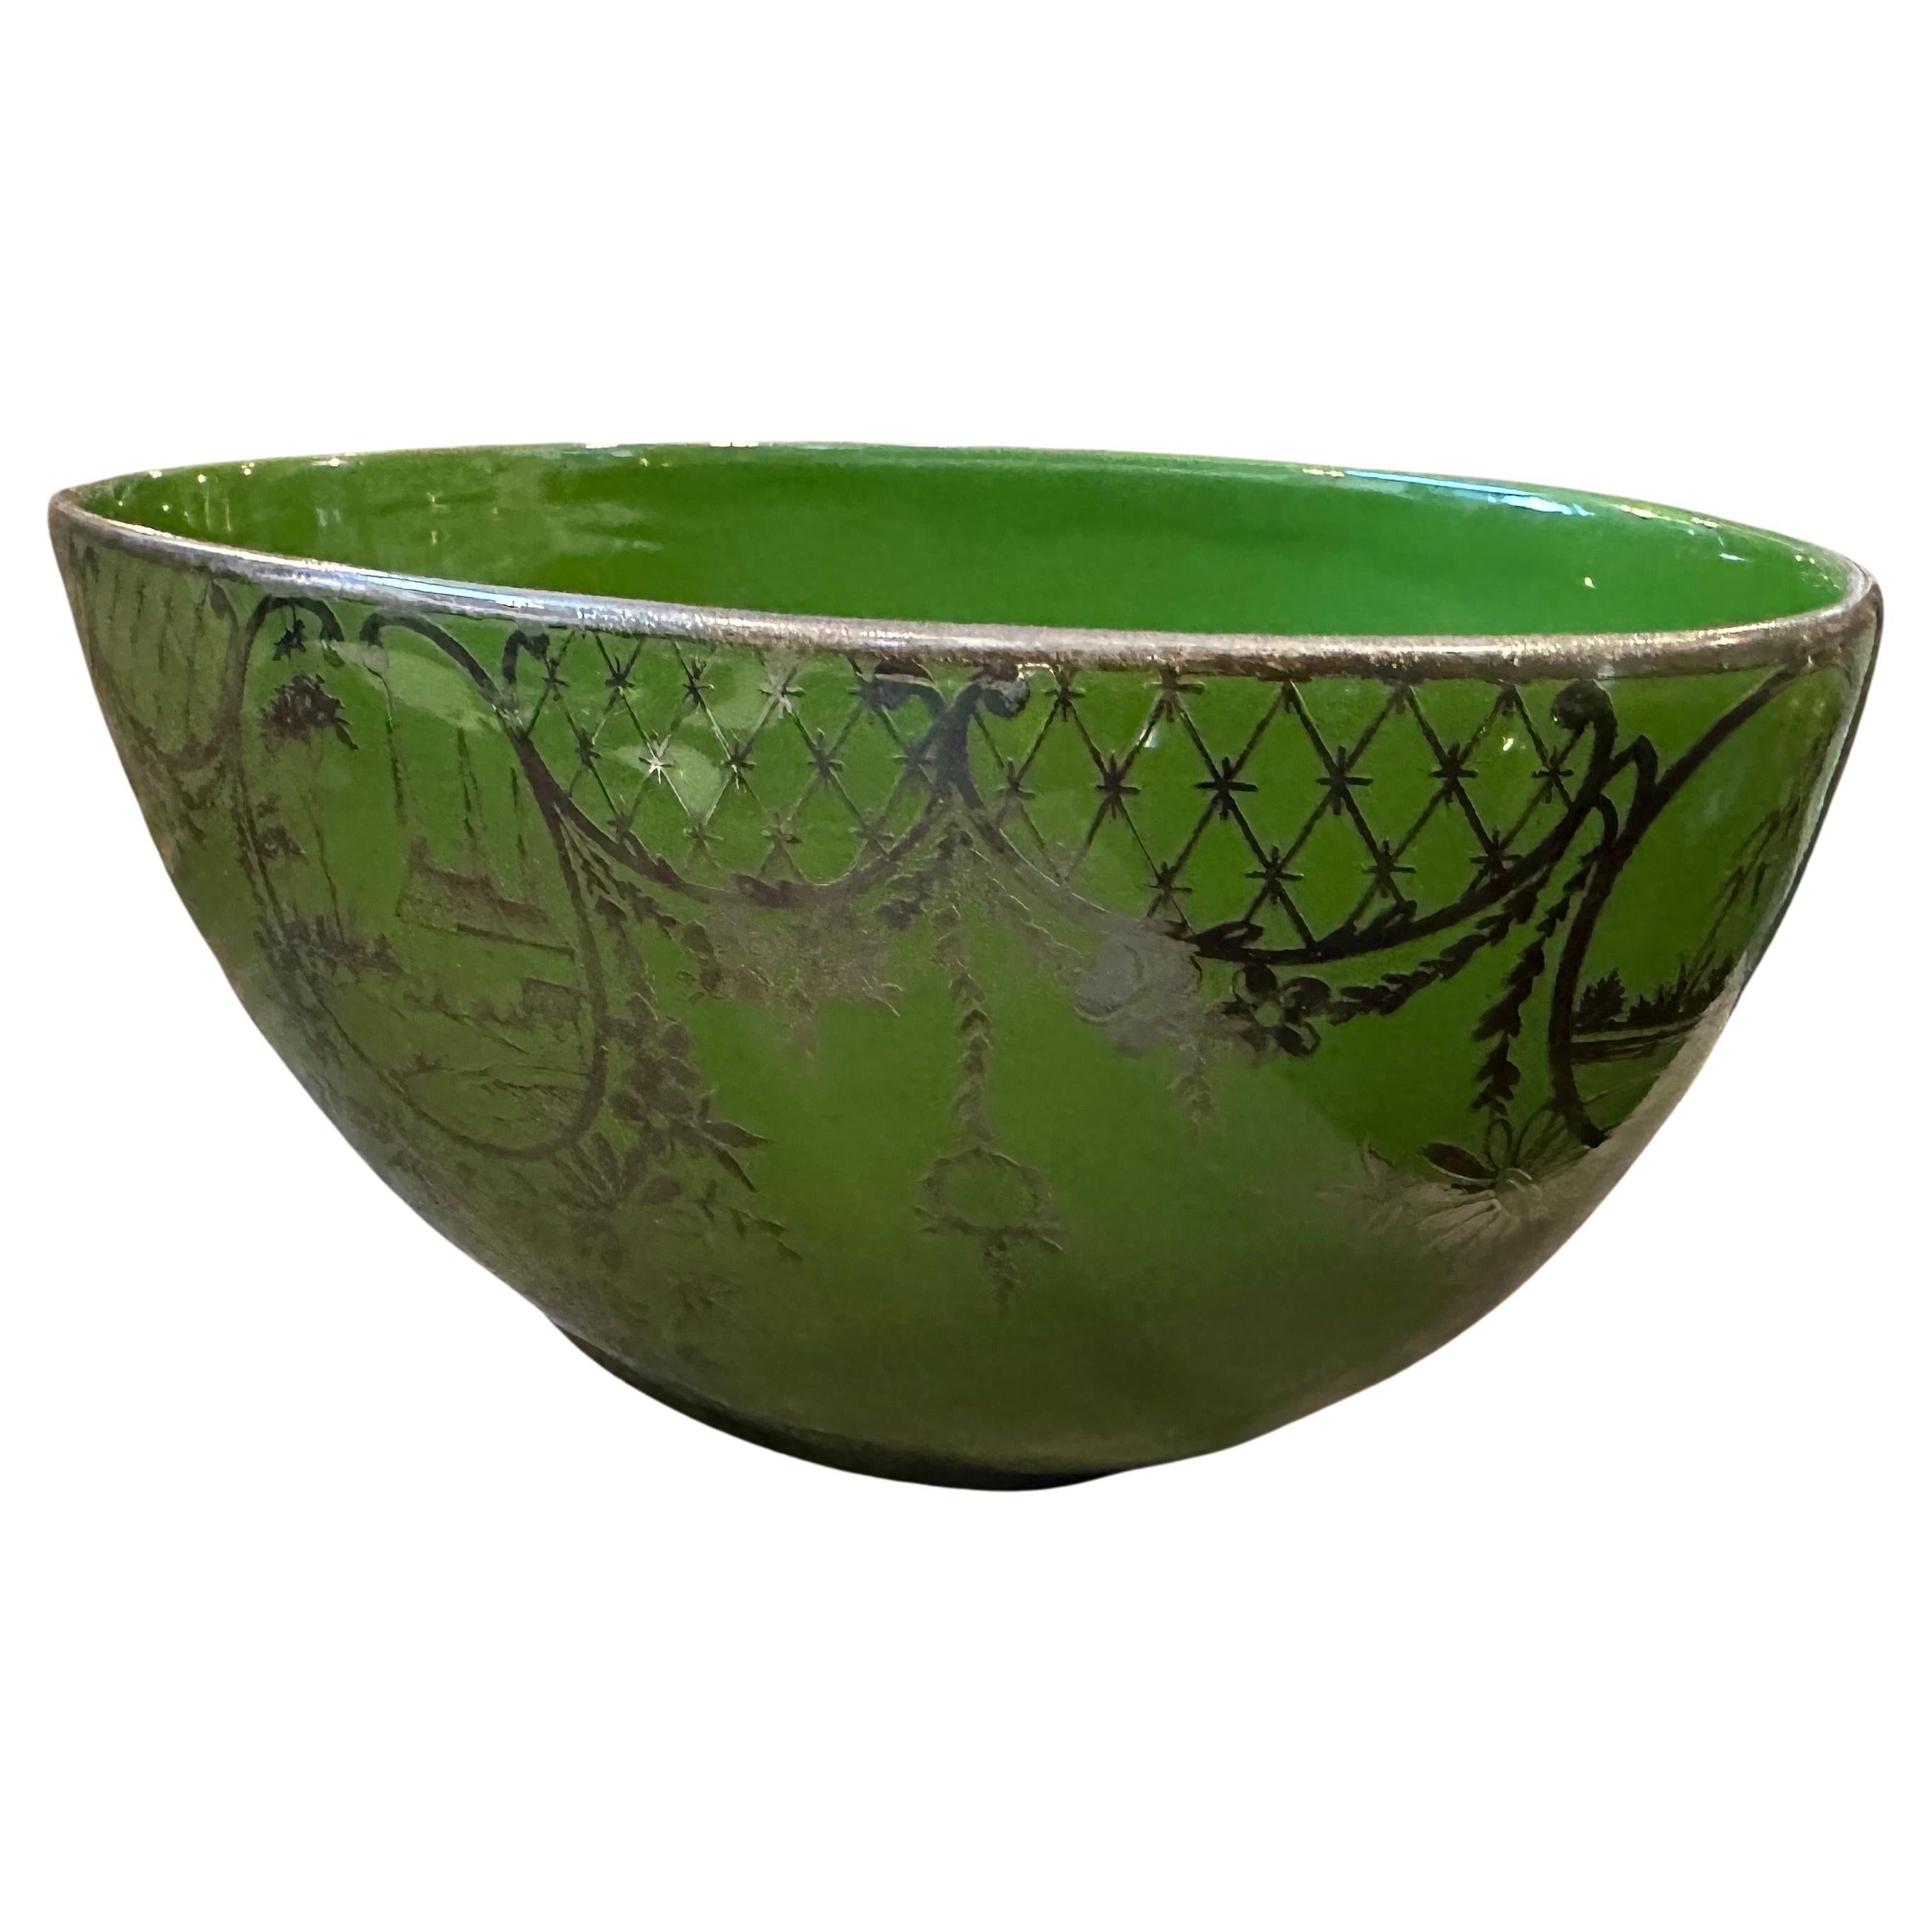 An Art Deco Green Ceramic and Silver Oval Centerpiece manufactured in Italy in the Forties, oval-shaped ceramic in a shade of green with a glazed finish and sterling silver decors. The use of green ceramic and silver creates an elegant contrast, and